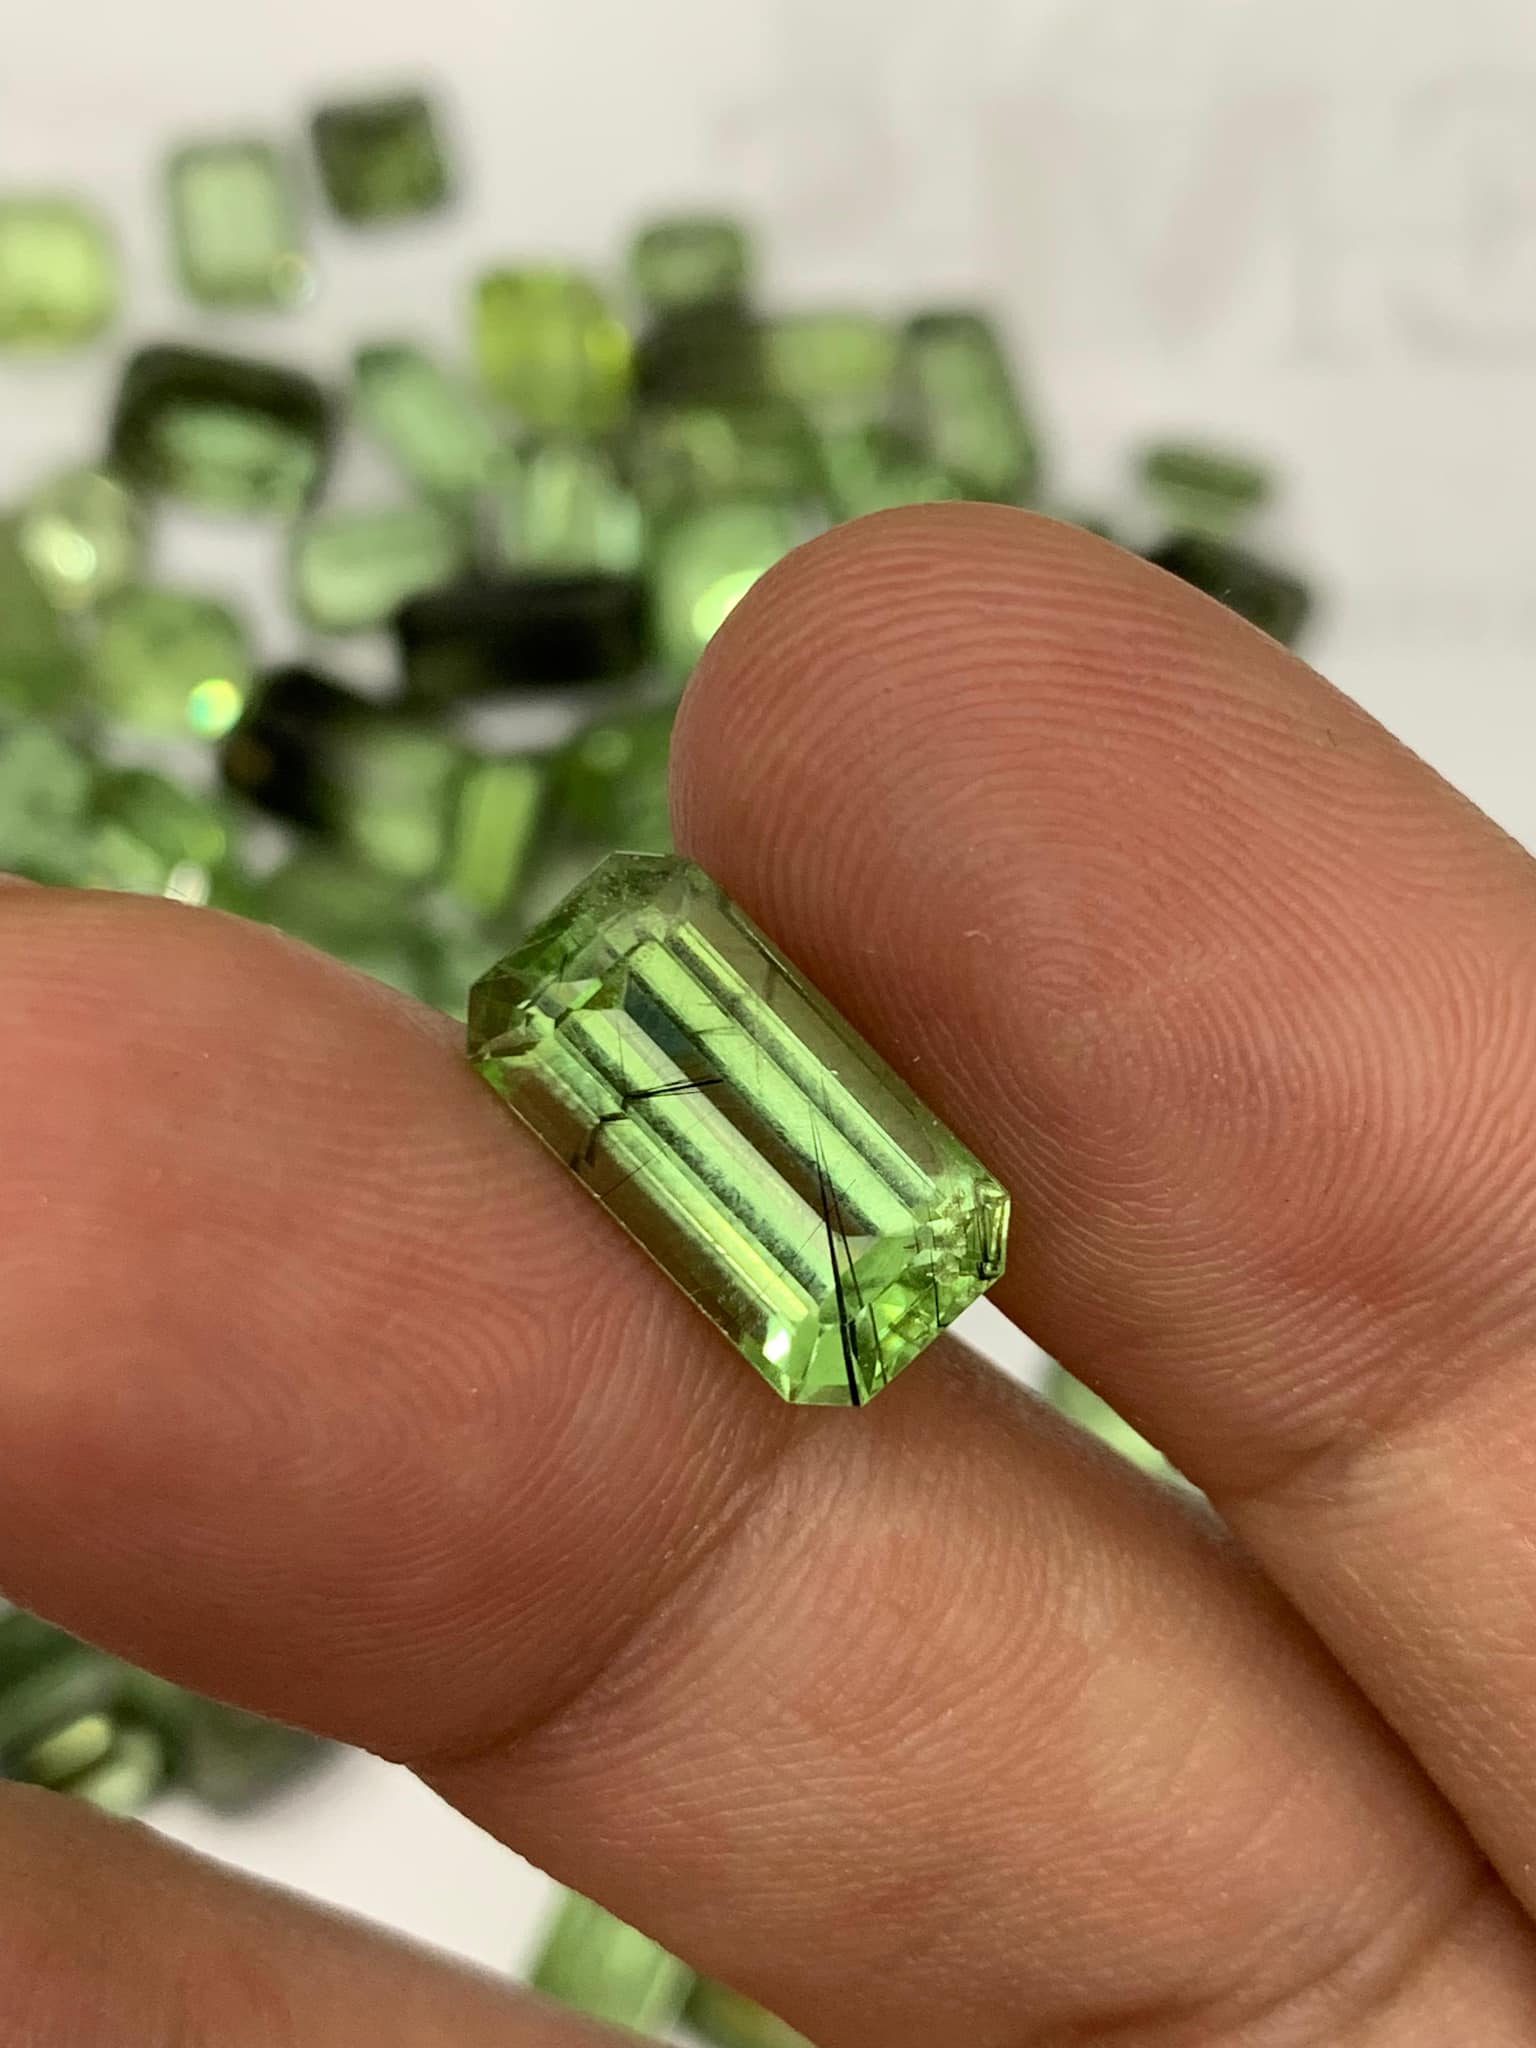 Checkout these apple green rare peridots with Ludwigite Inclusions